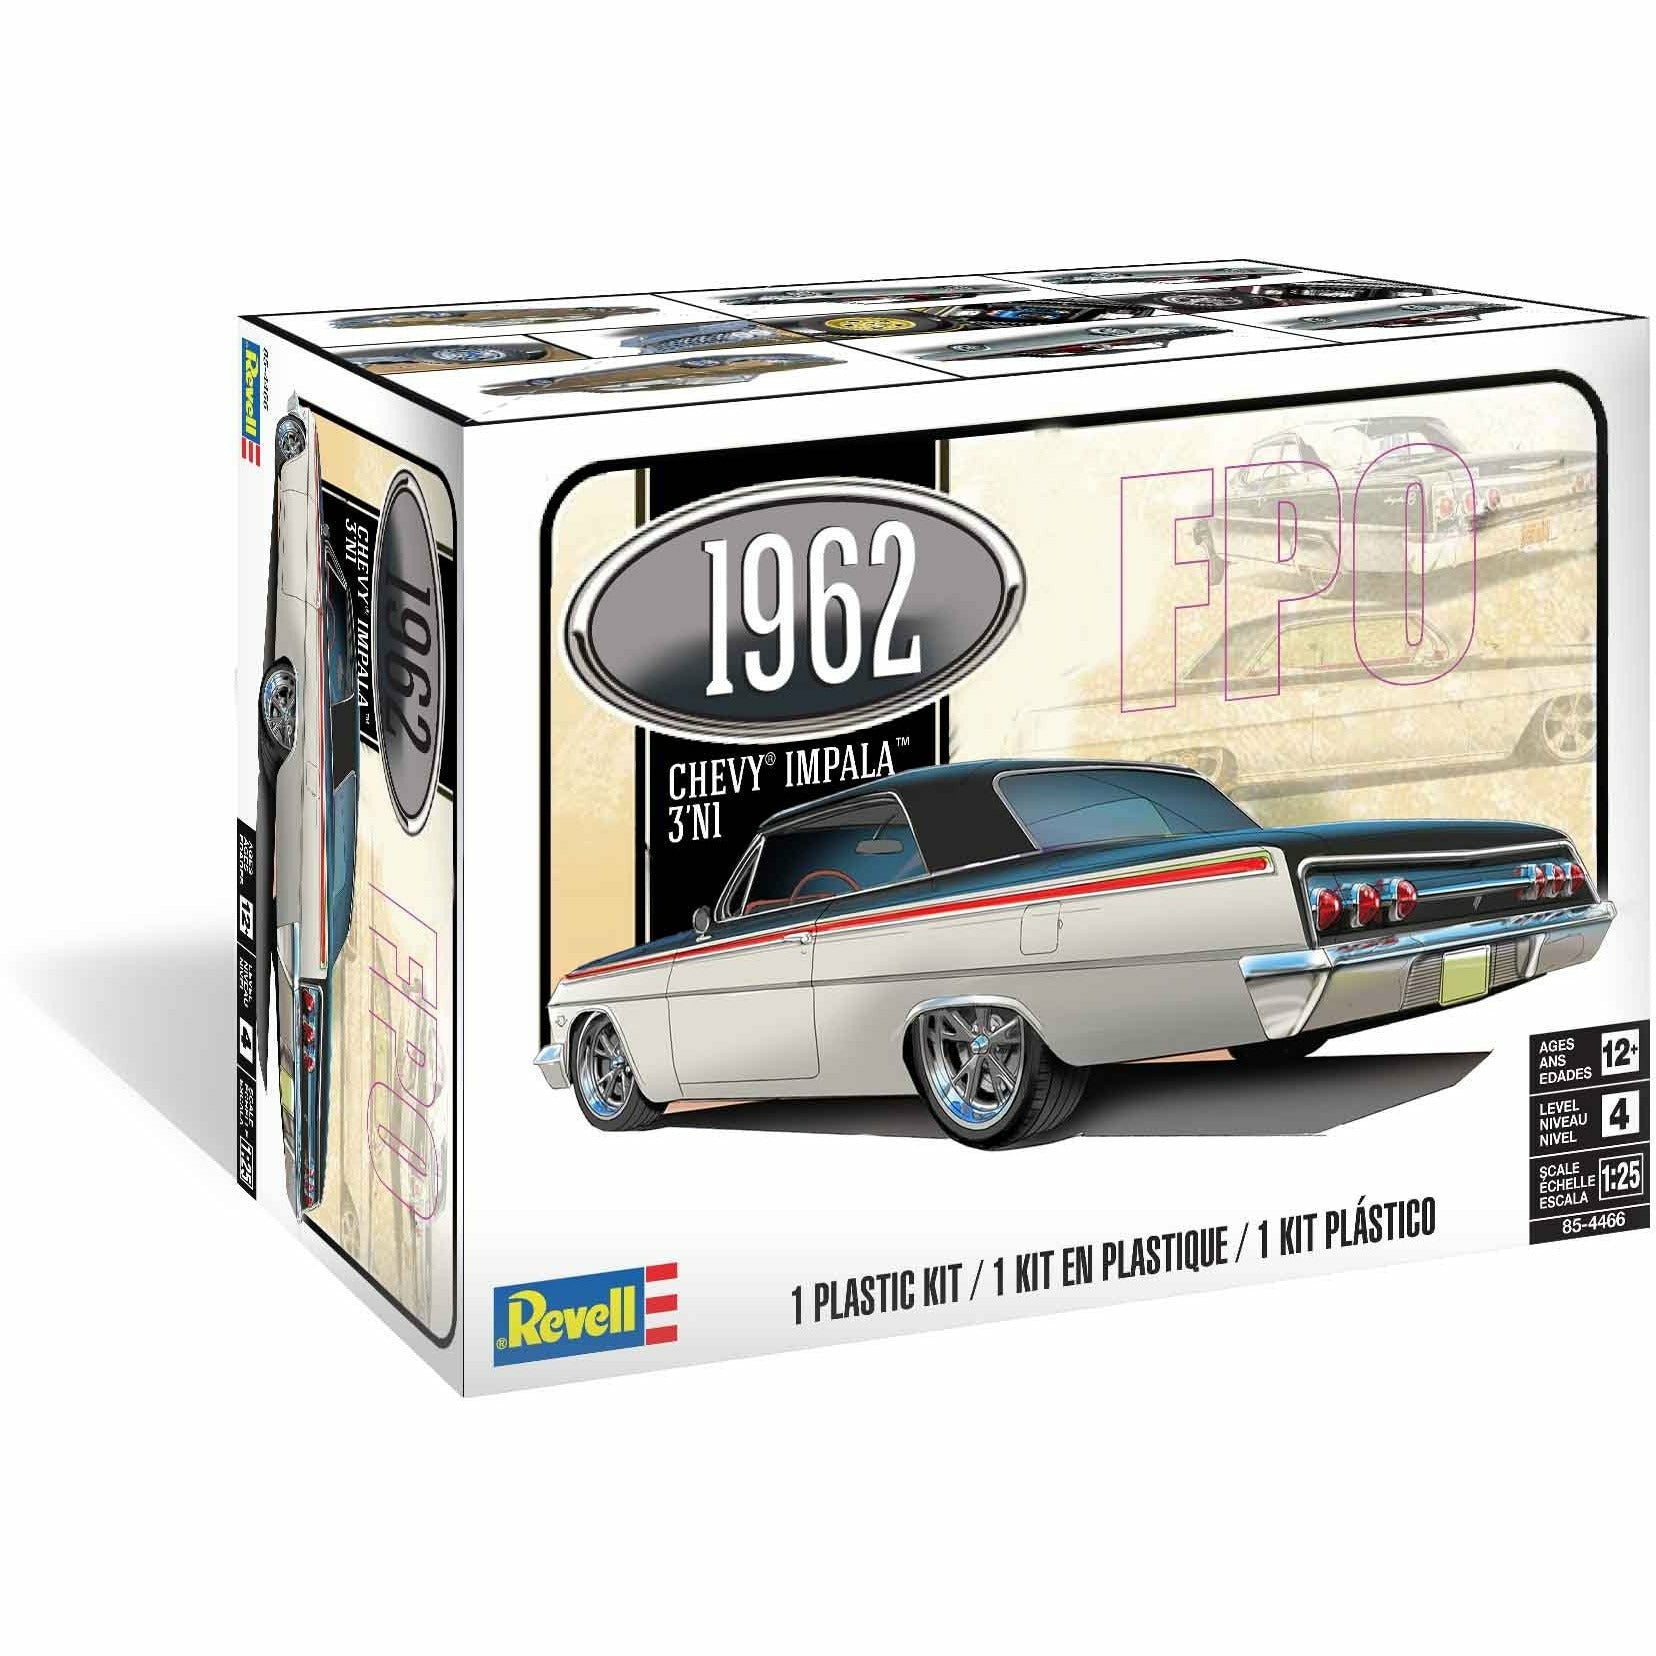 1962 Chevrolet Impala SS Hardtop 3 in 1 1/25 by Revell